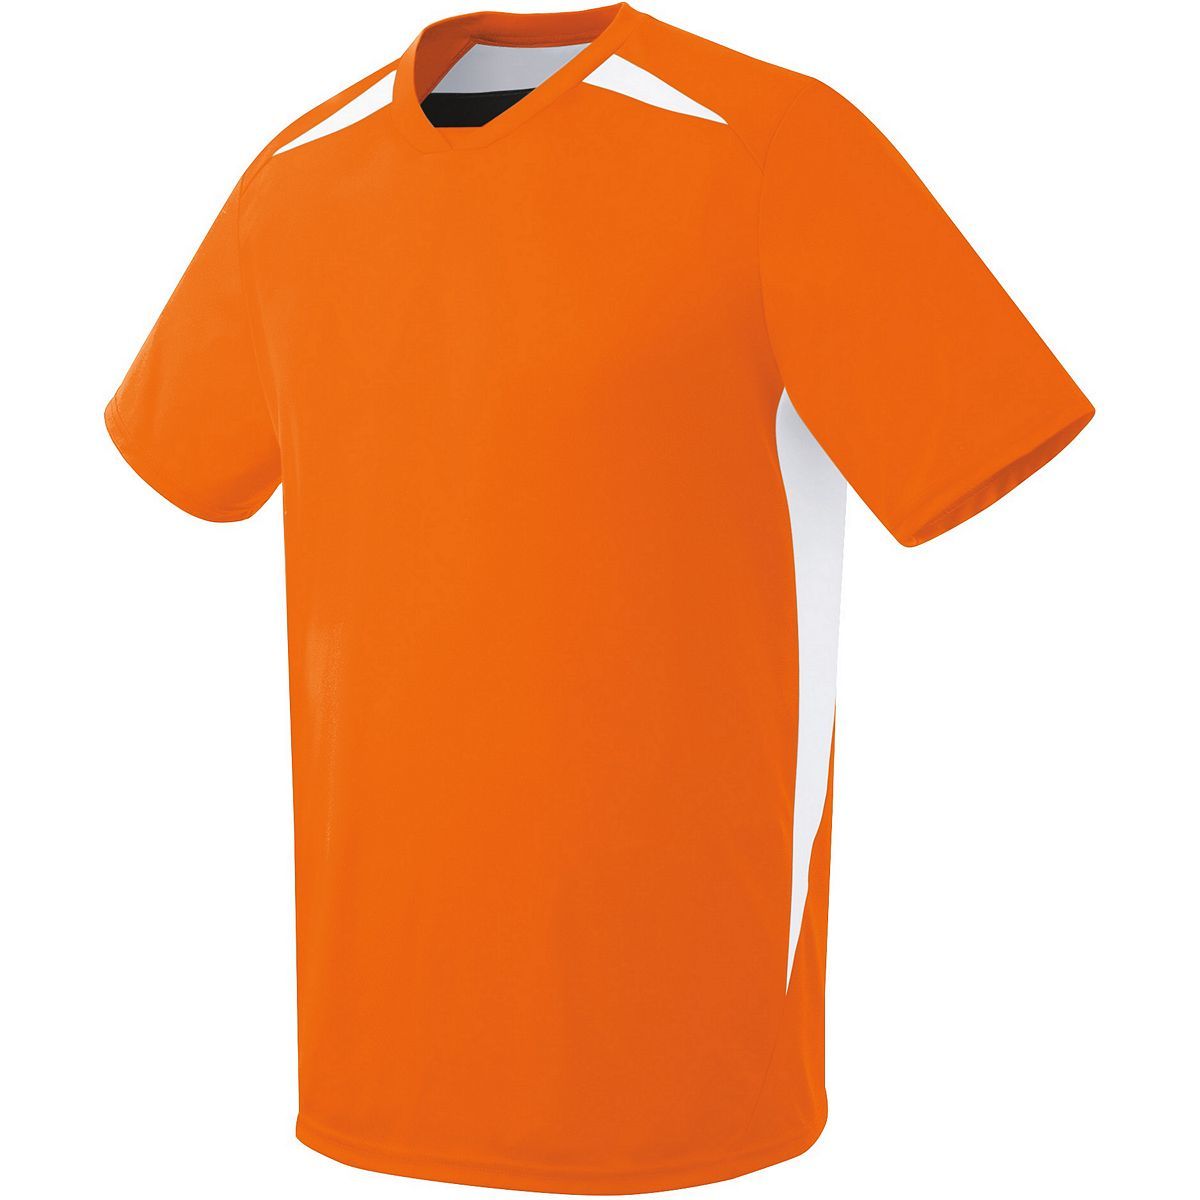 High 5 Youth Hawk Jersey in Orange/White  -Part of the Youth, Youth-Jersey, High5-Products, Soccer, Shirts, All-Sports-1 product lines at KanaleyCreations.com